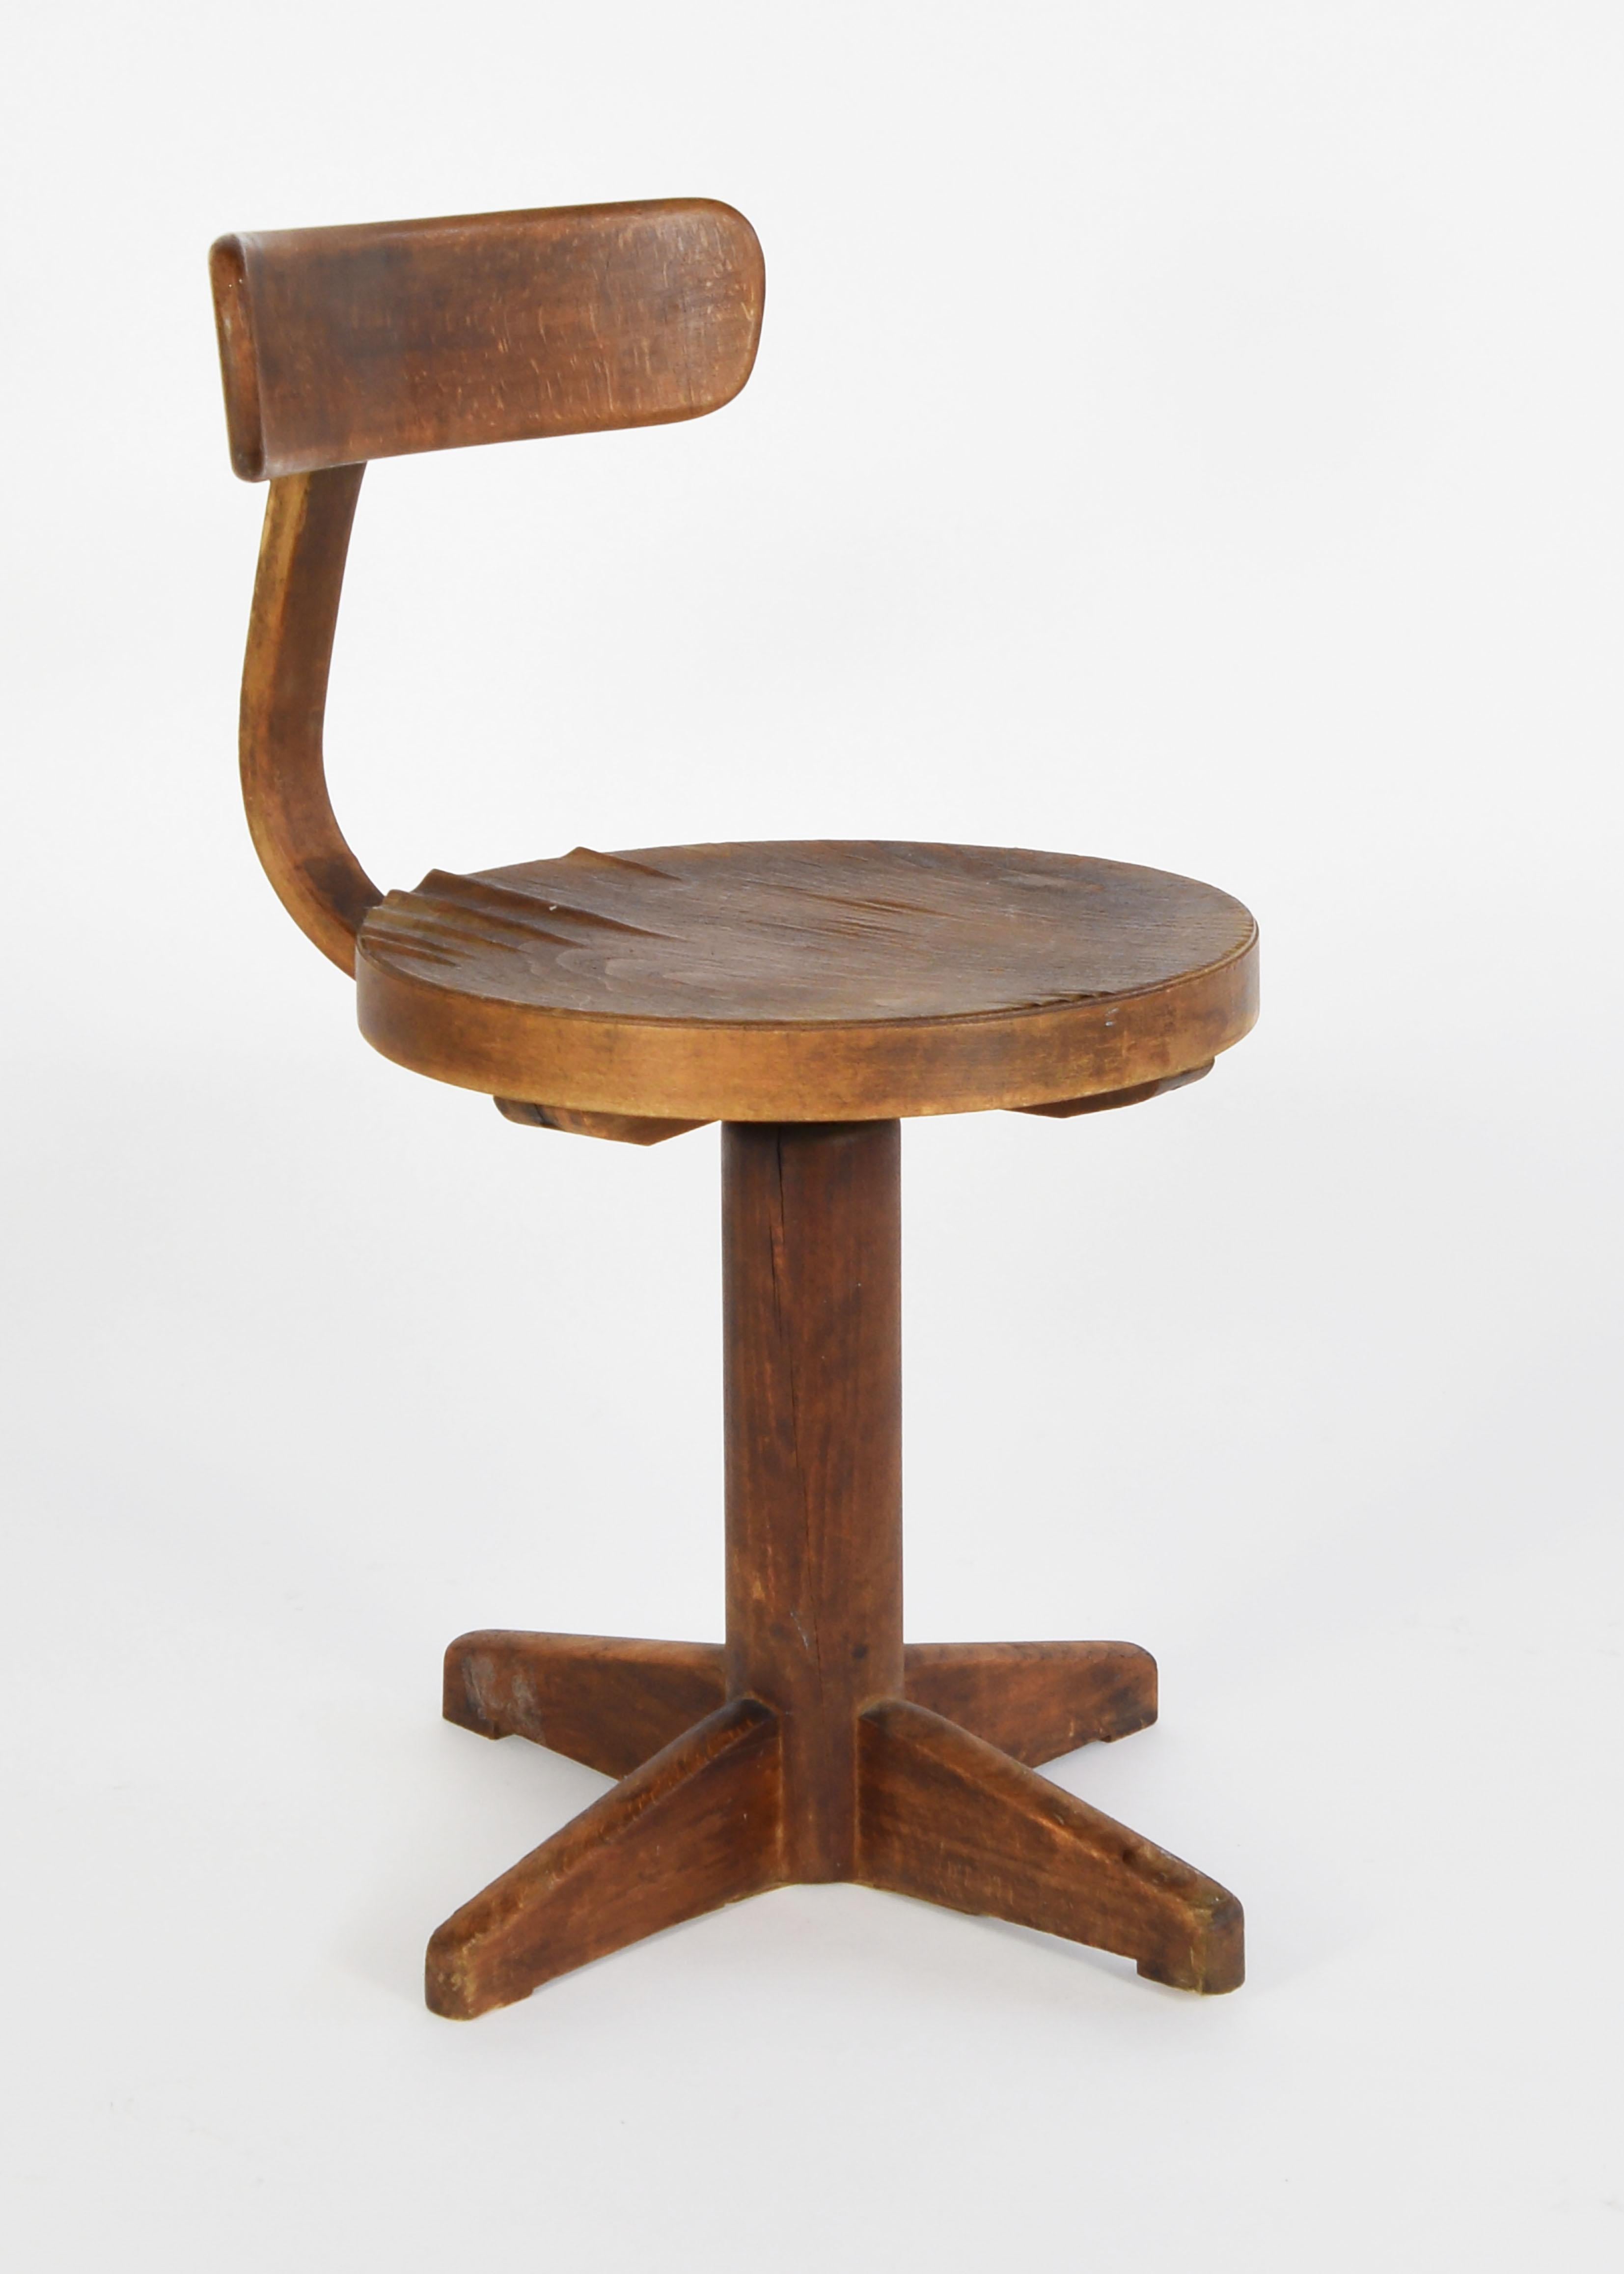 Great desk chair, DAR, designed by Fritz Hansen in the 1930s, signed under seat.
Made of beechwood.

The desk chair symbols the start of great designs by the hand of Fritz Hansen. Light designs made useable in all areas in people's houses and around